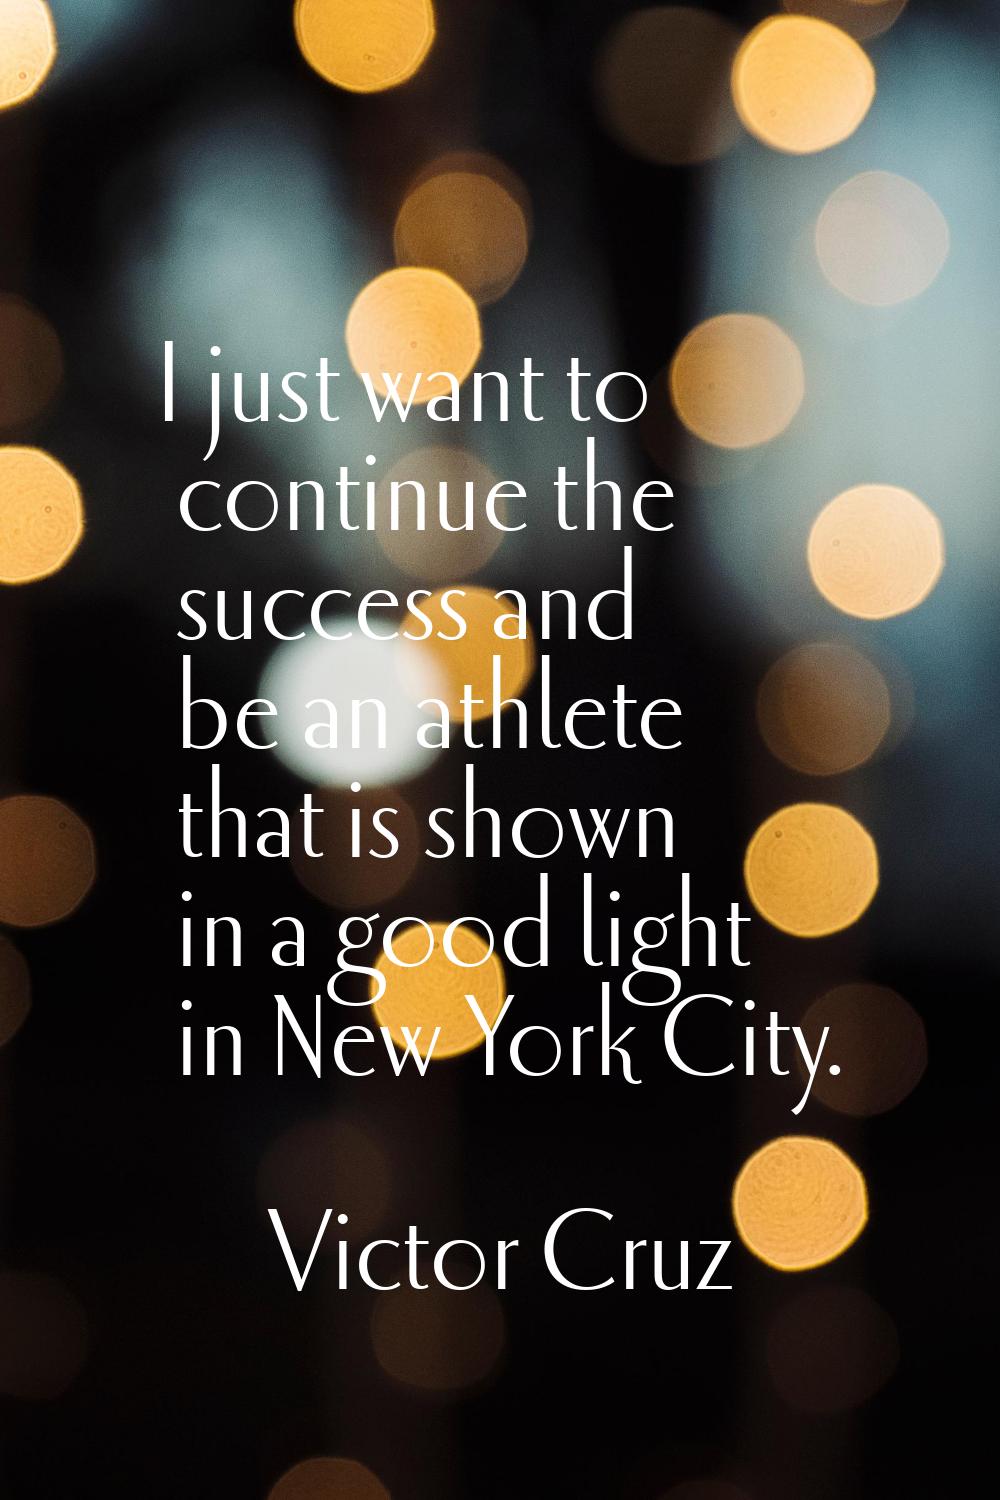 I just want to continue the success and be an athlete that is shown in a good light in New York Cit